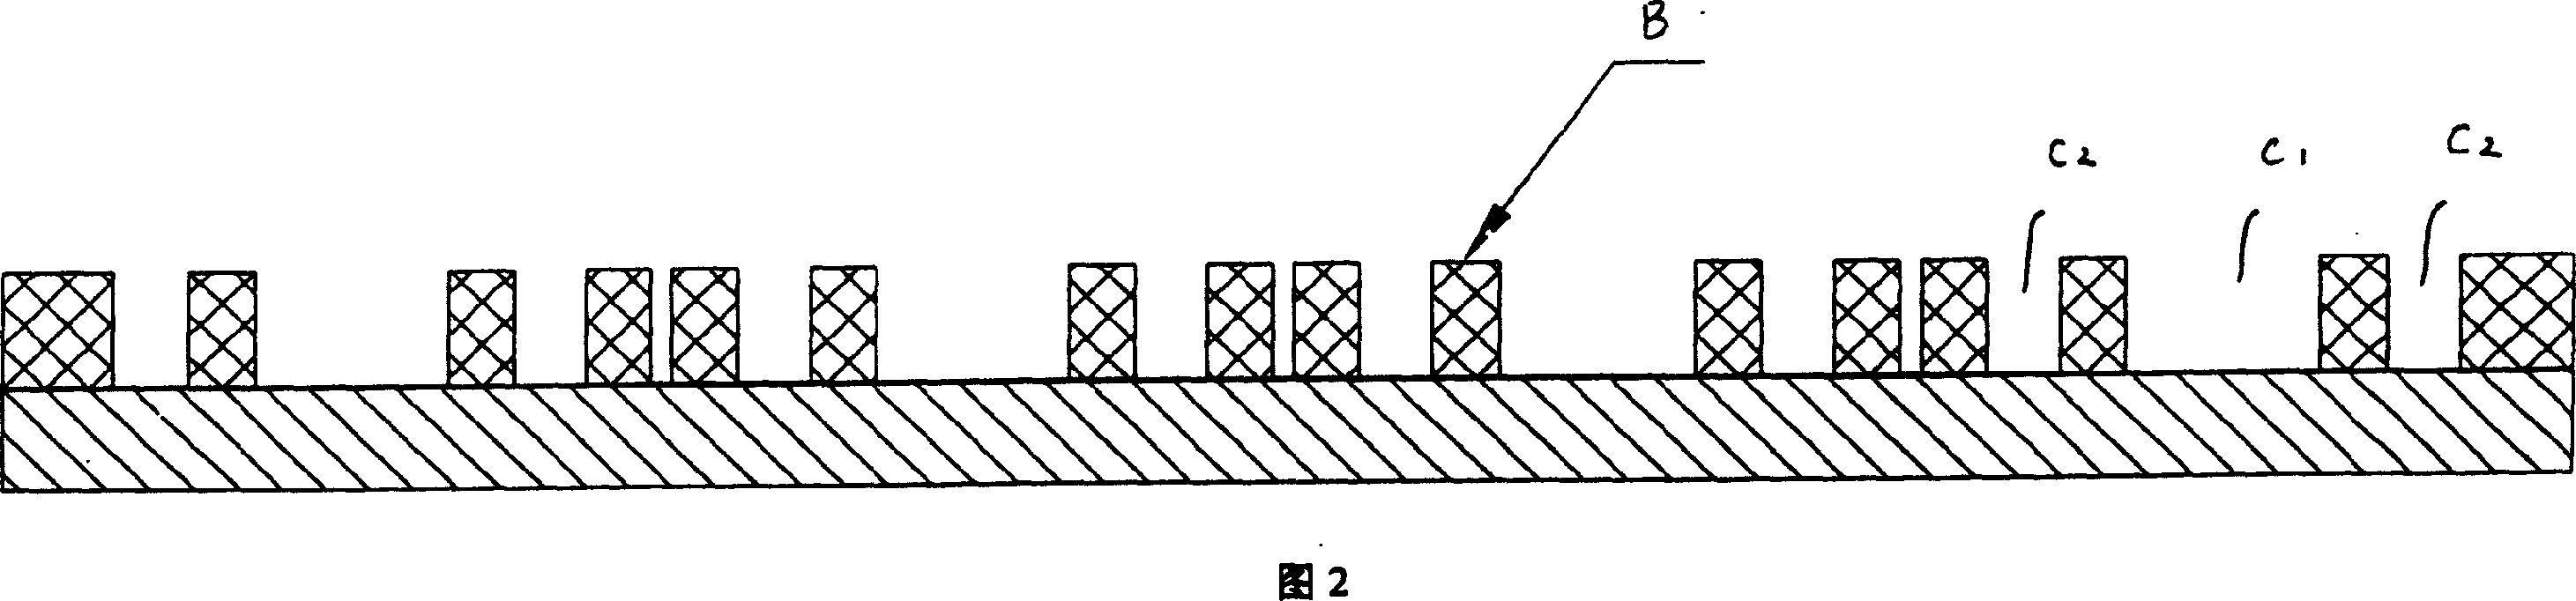 Lead frame for integrated circuit or discrete components ultra-thin non-pin packing